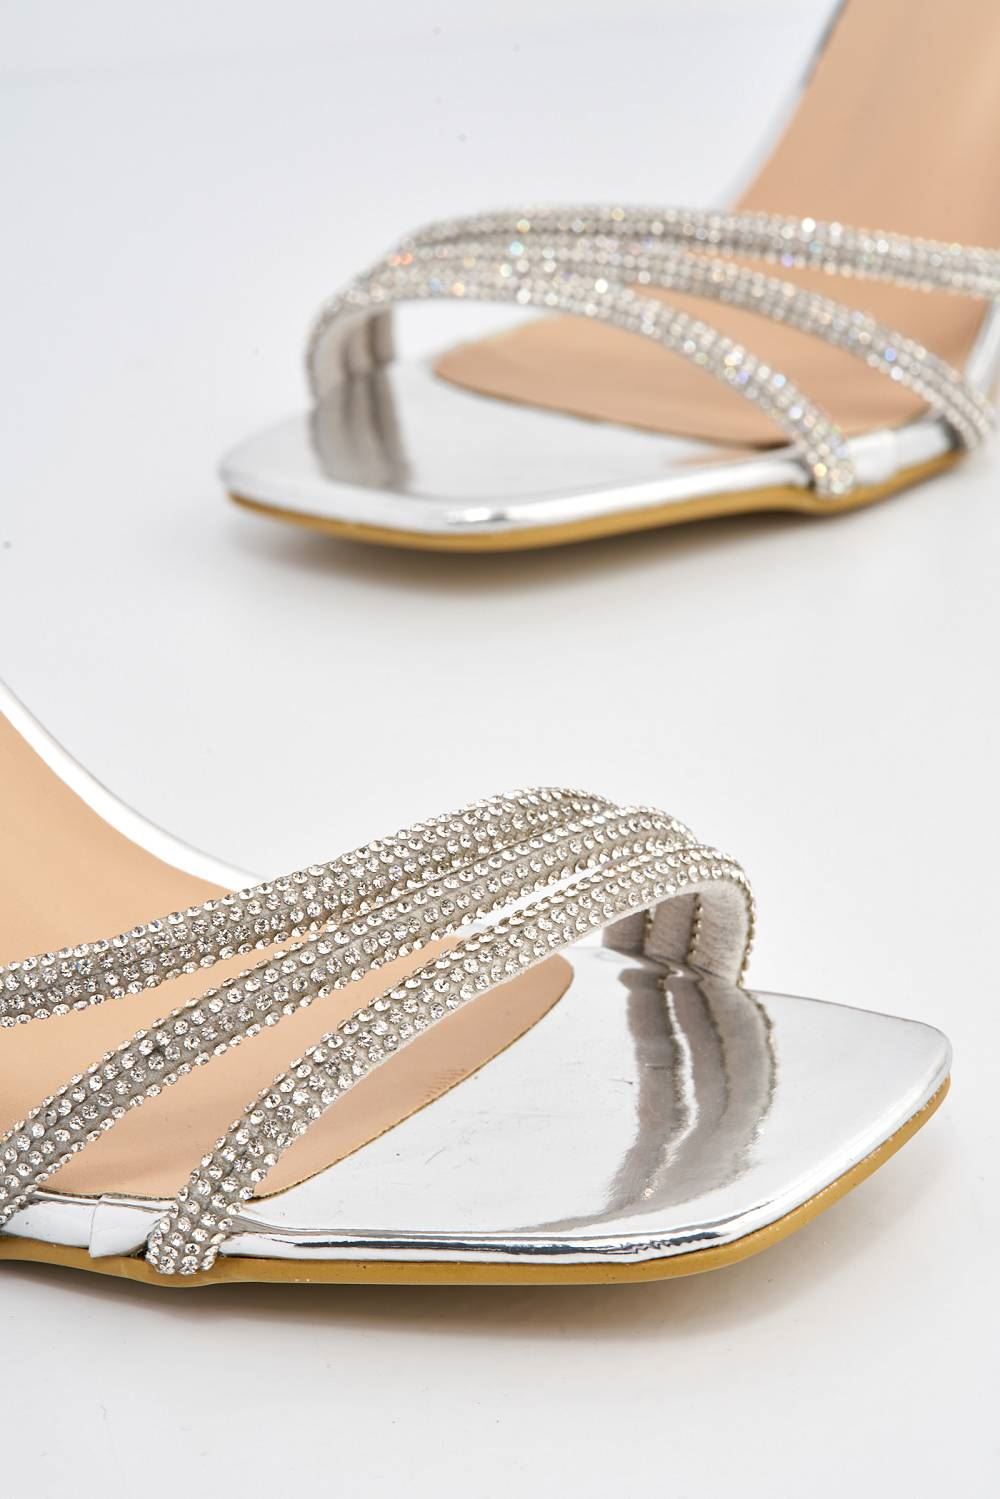 Miss Diva Camina Diamante Embellished 3 Strap Heeled Sandals in Silver